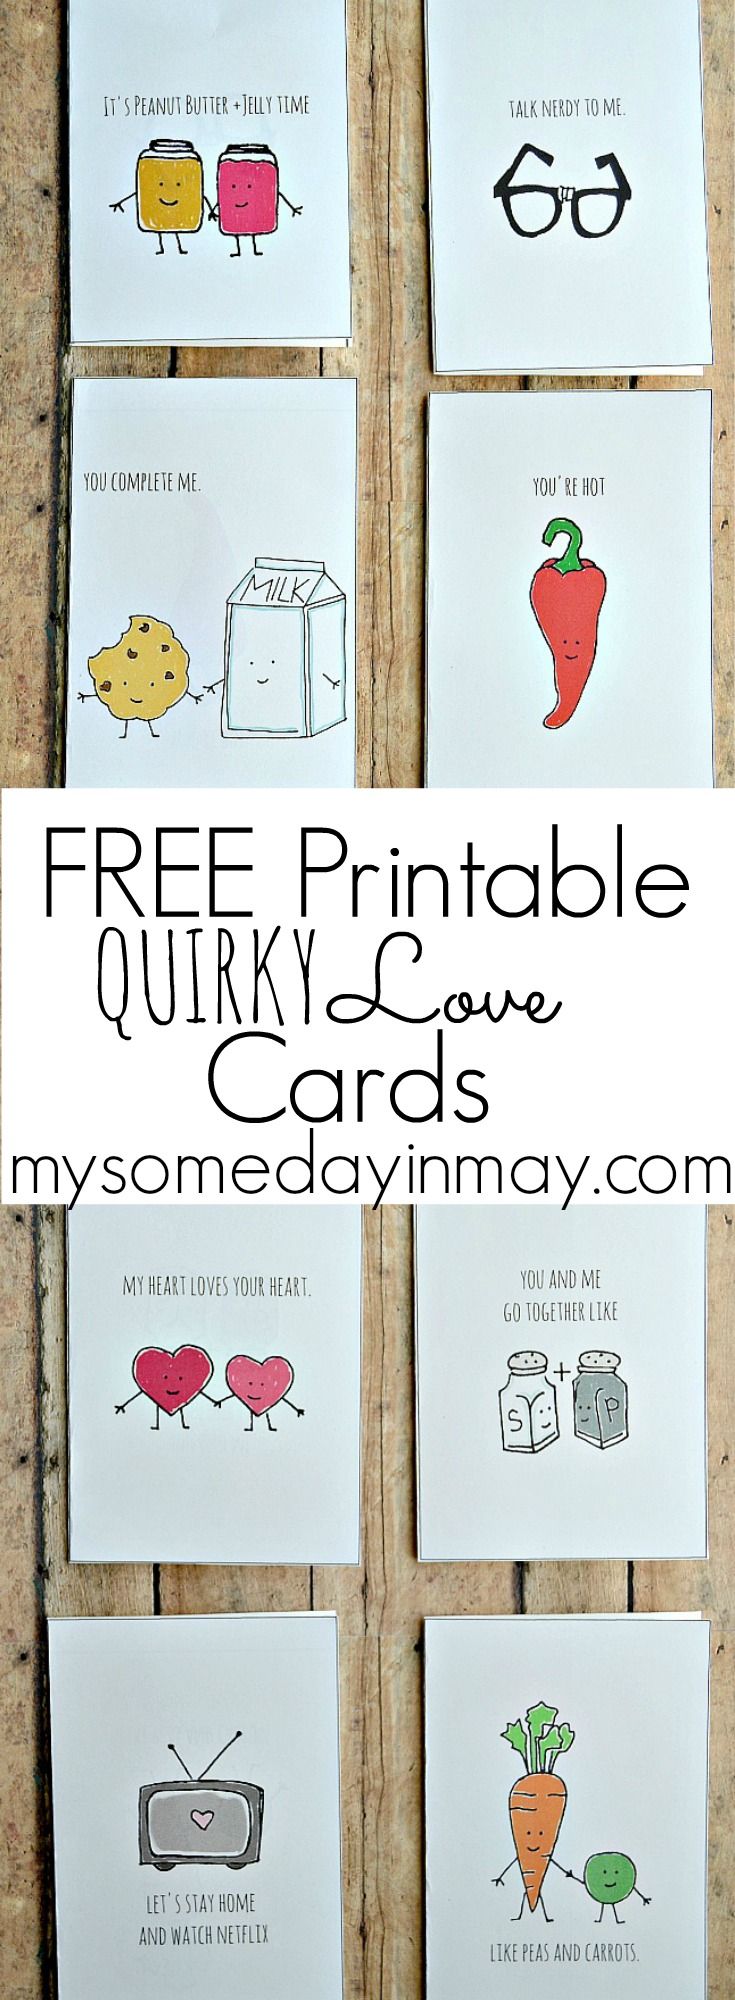 FREE printable cards for Valentine's Day!